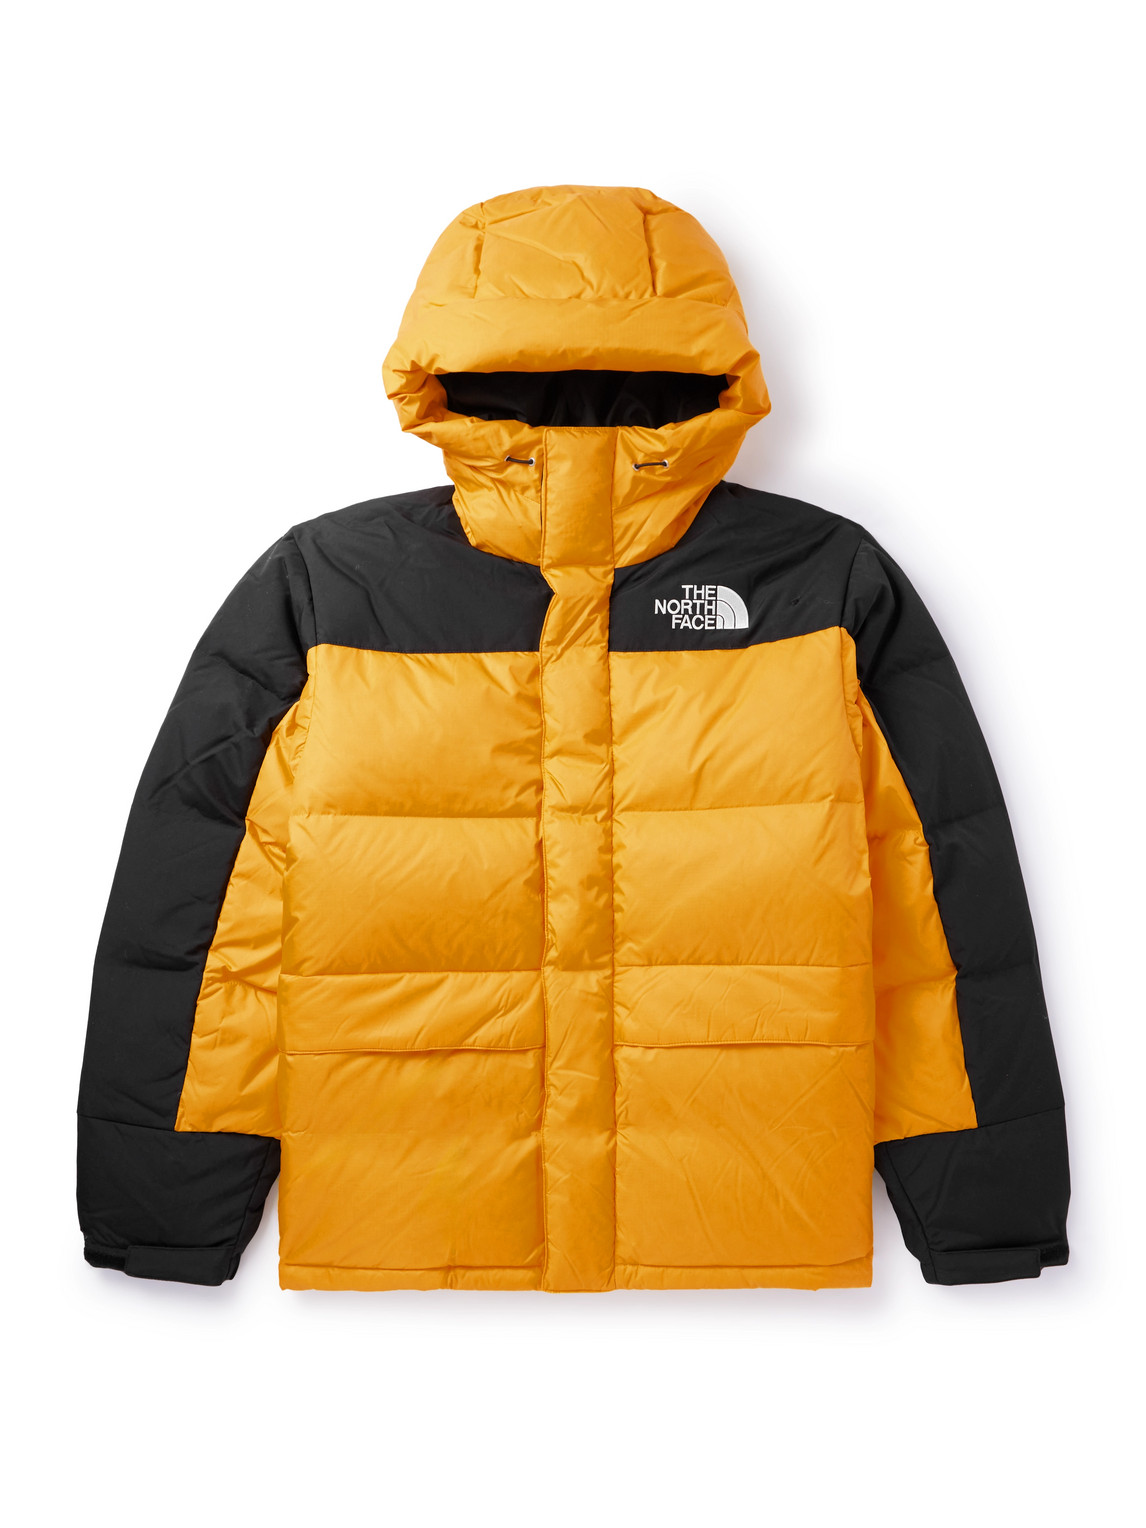 The North Face - Himalayan Logo-Embroidered Quilted Ripstop and Shell Down Hooded Jacket - Men - Yellow - M von The North Face